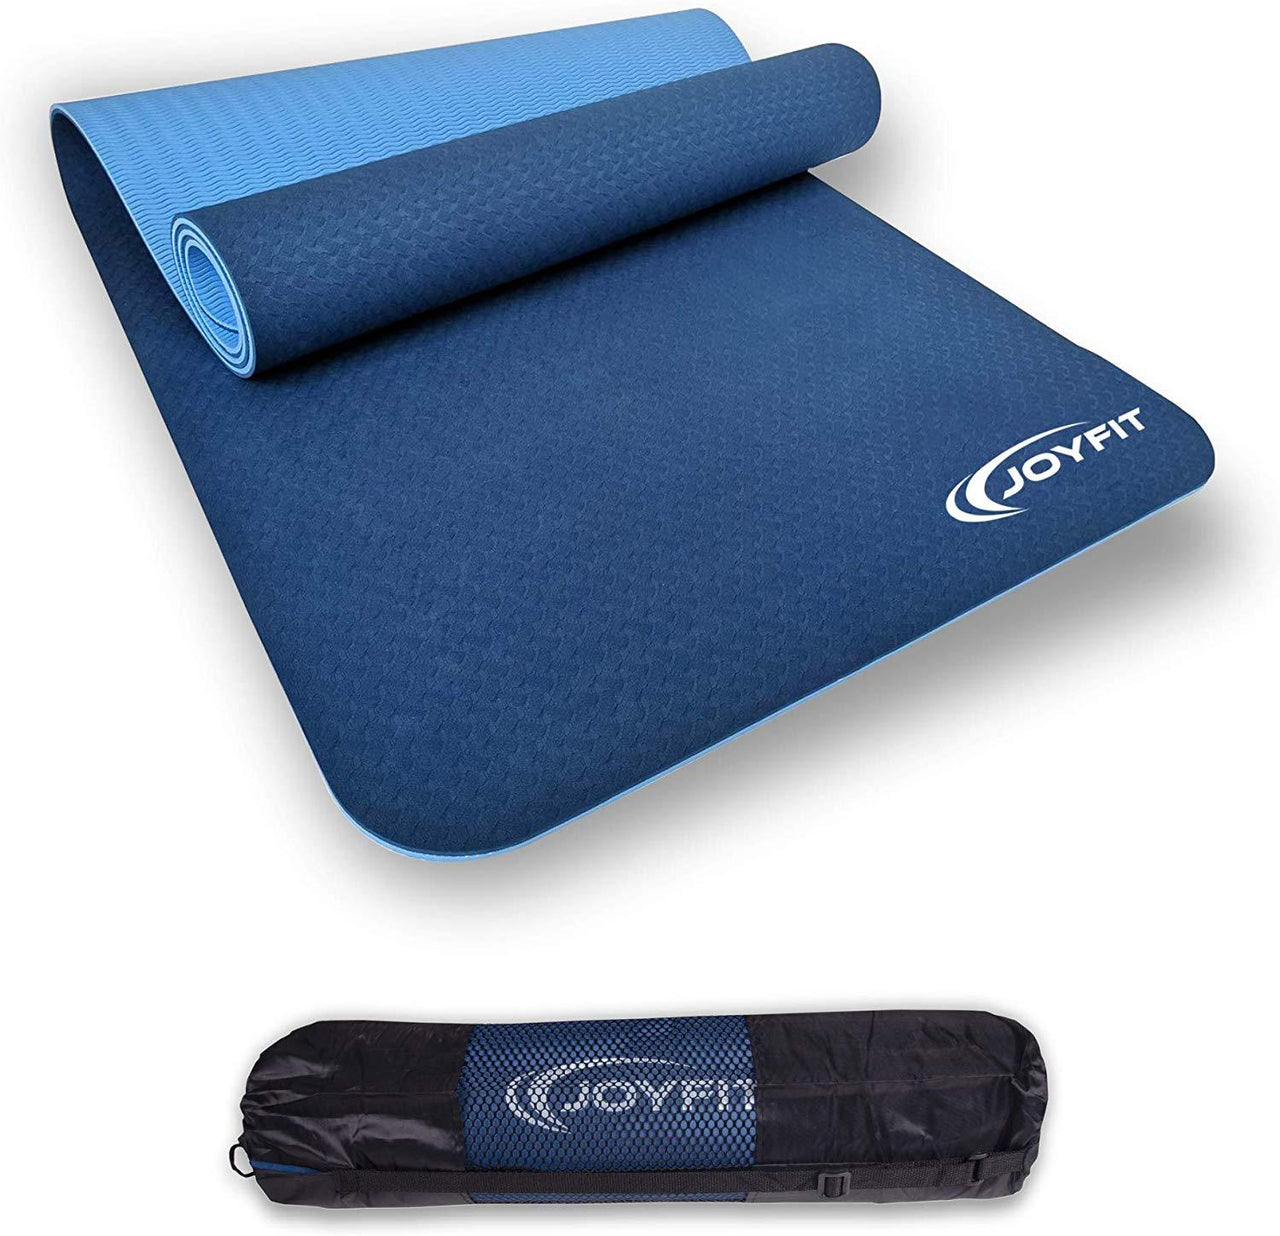 Forericy Thick Yoga Mat Damp Proof Non Slip Anti-Tear Gym India